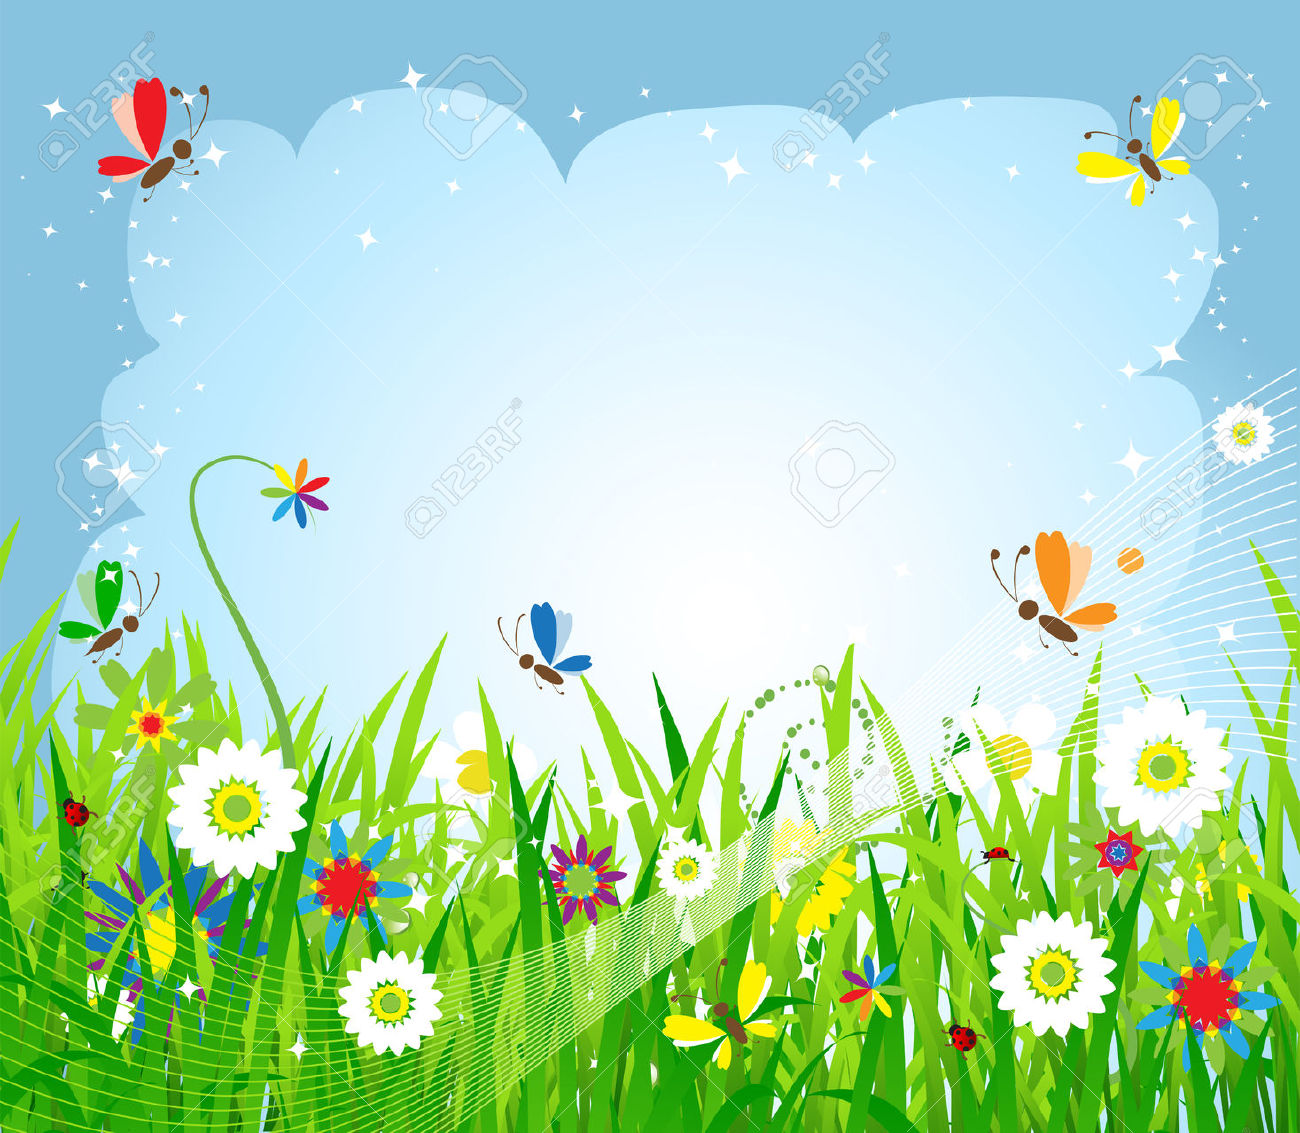 flower meadow clipart - photo #8